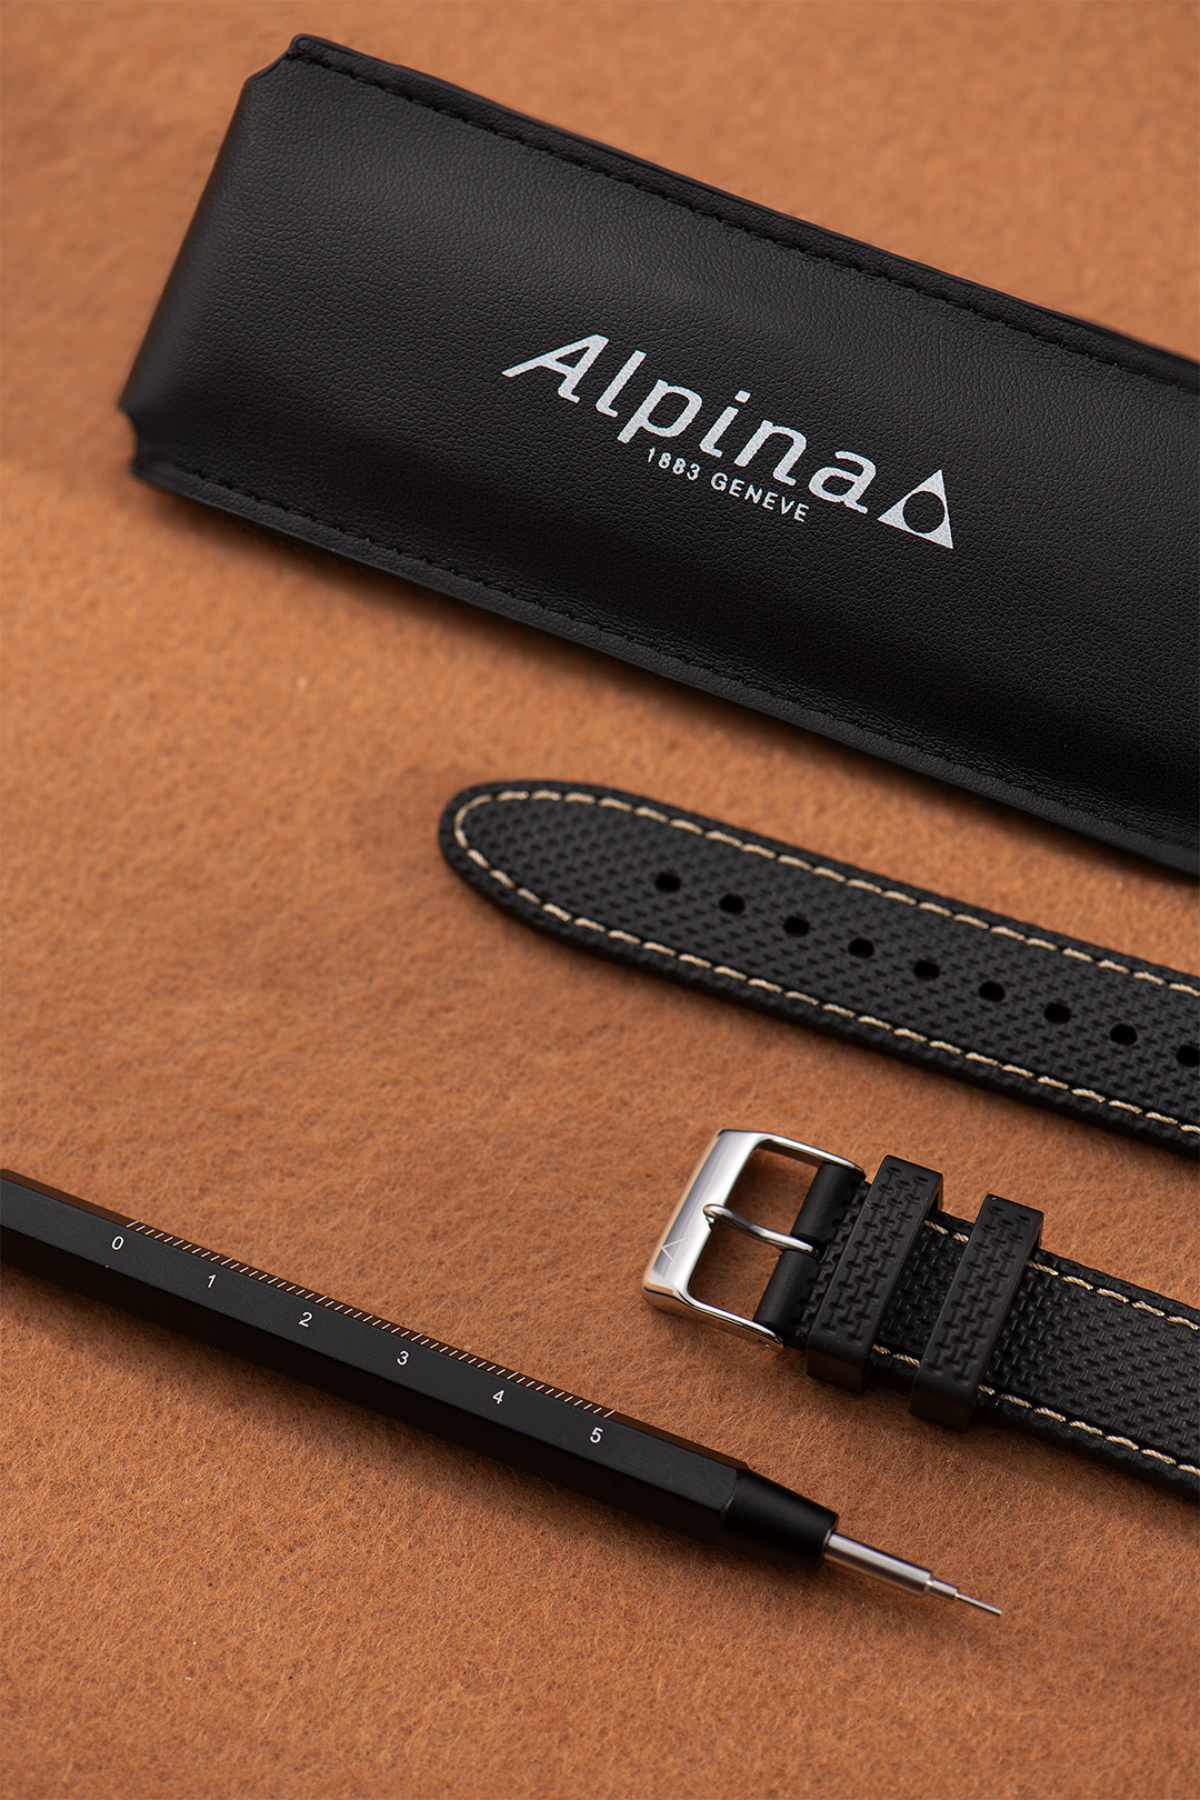 Alpina's Heritage Collection: Two Charming Watches For Mastering The Air And Sea